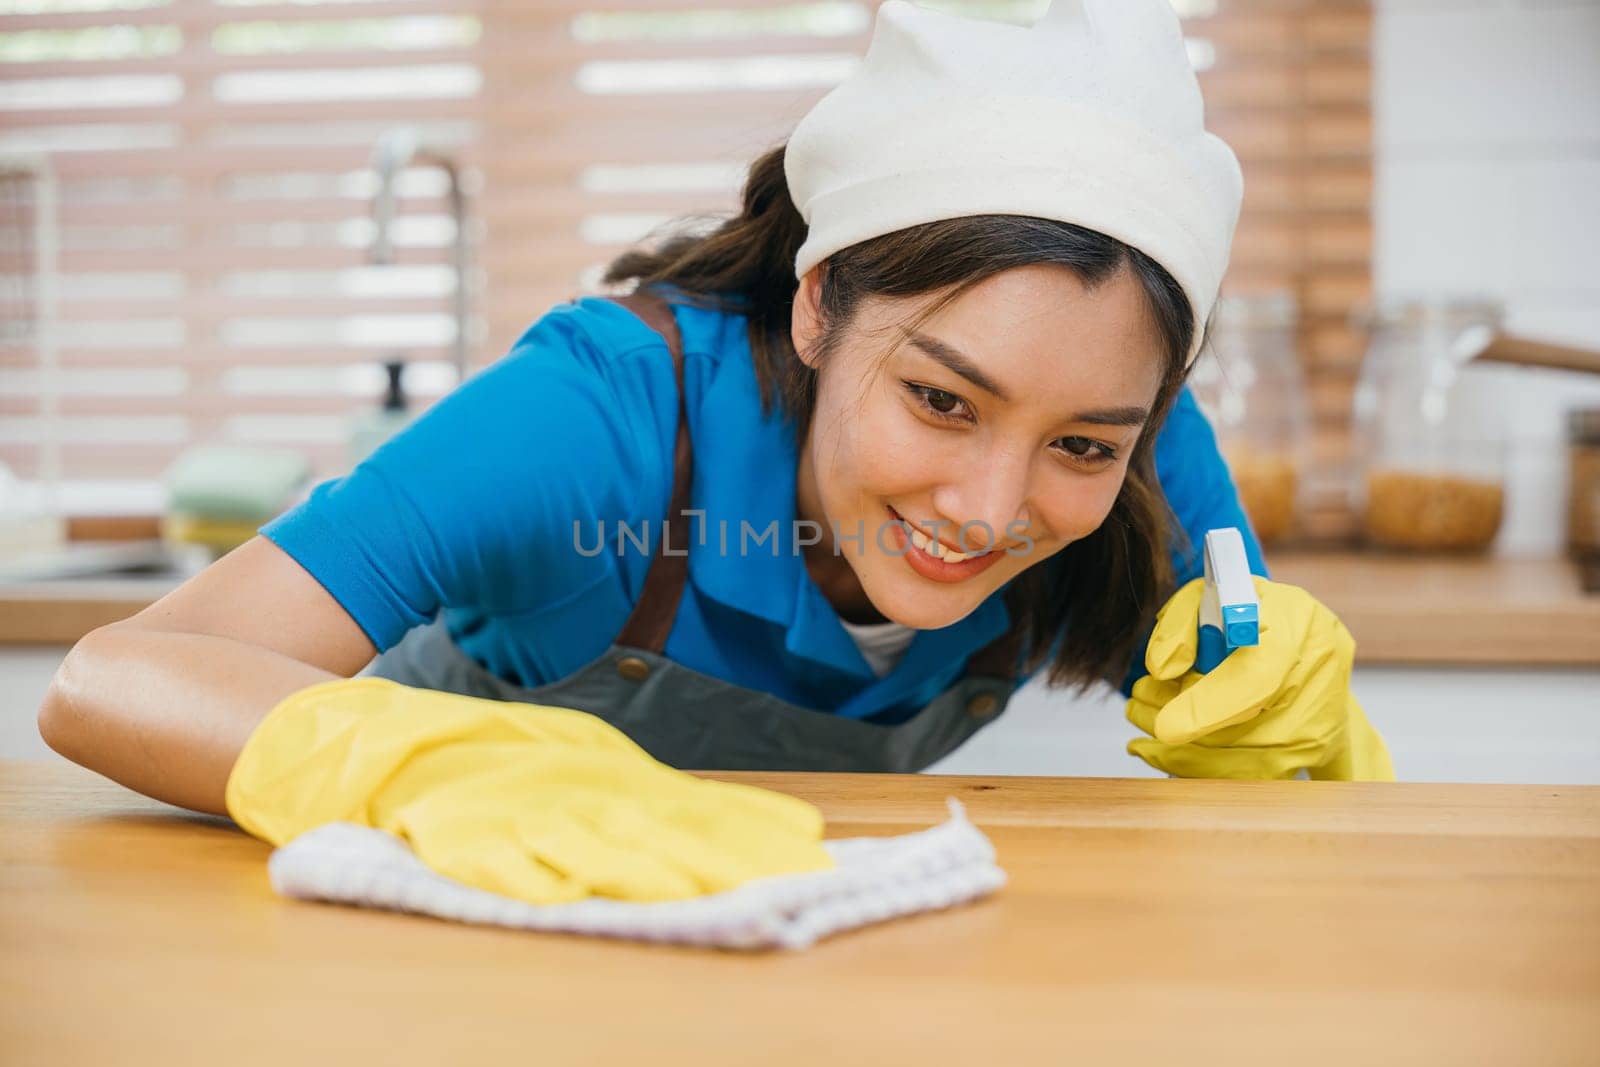 Asian cleaning service professional uses liquid spray to clean wooden kitchen counter. Housekeeping service ensures hygiene and cleanliness at home. Clean disinfect home care. maid household job. by Sorapop